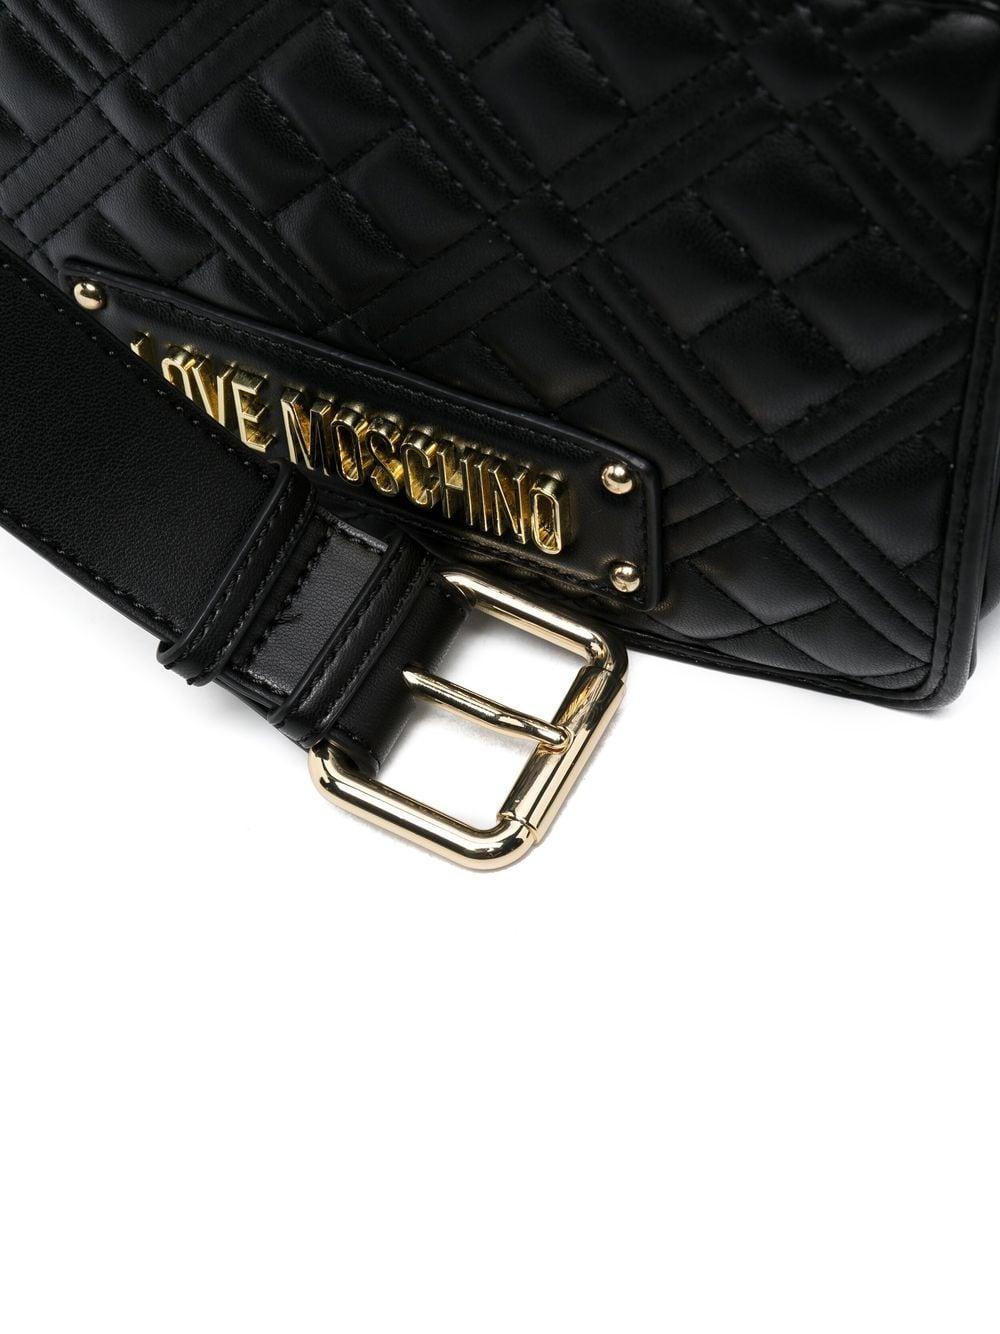 Love Moschino Quilted Leather Bag in Black | Lyst